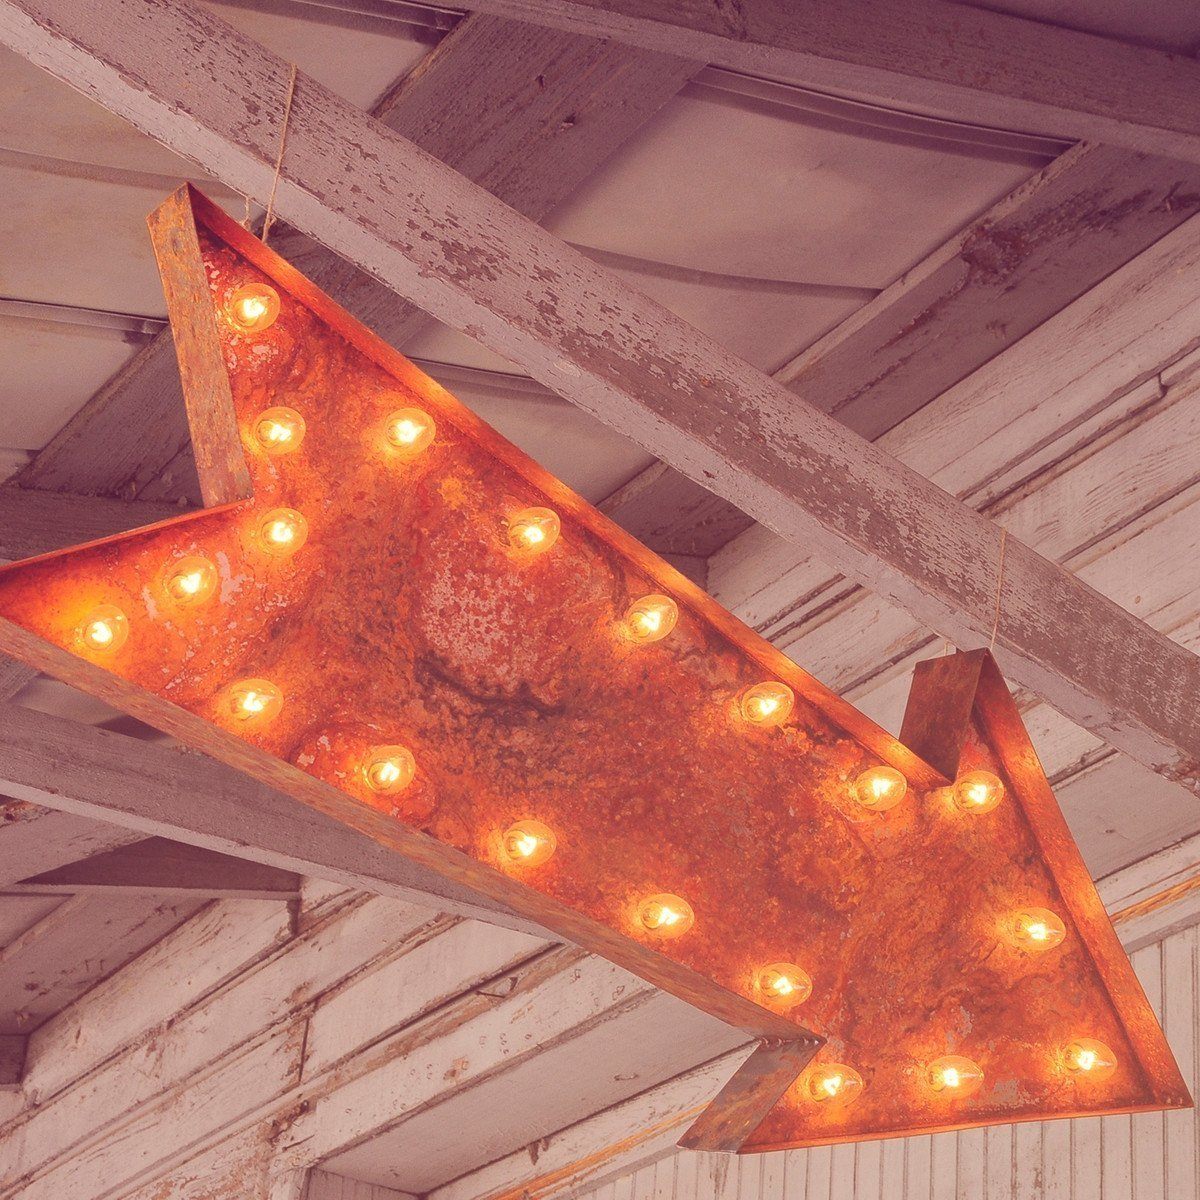 Marquee Vintage The 36” Large with Marquee Online Buy Rusty Sign Marquee Arrow (Rustic) - Lights - Lights